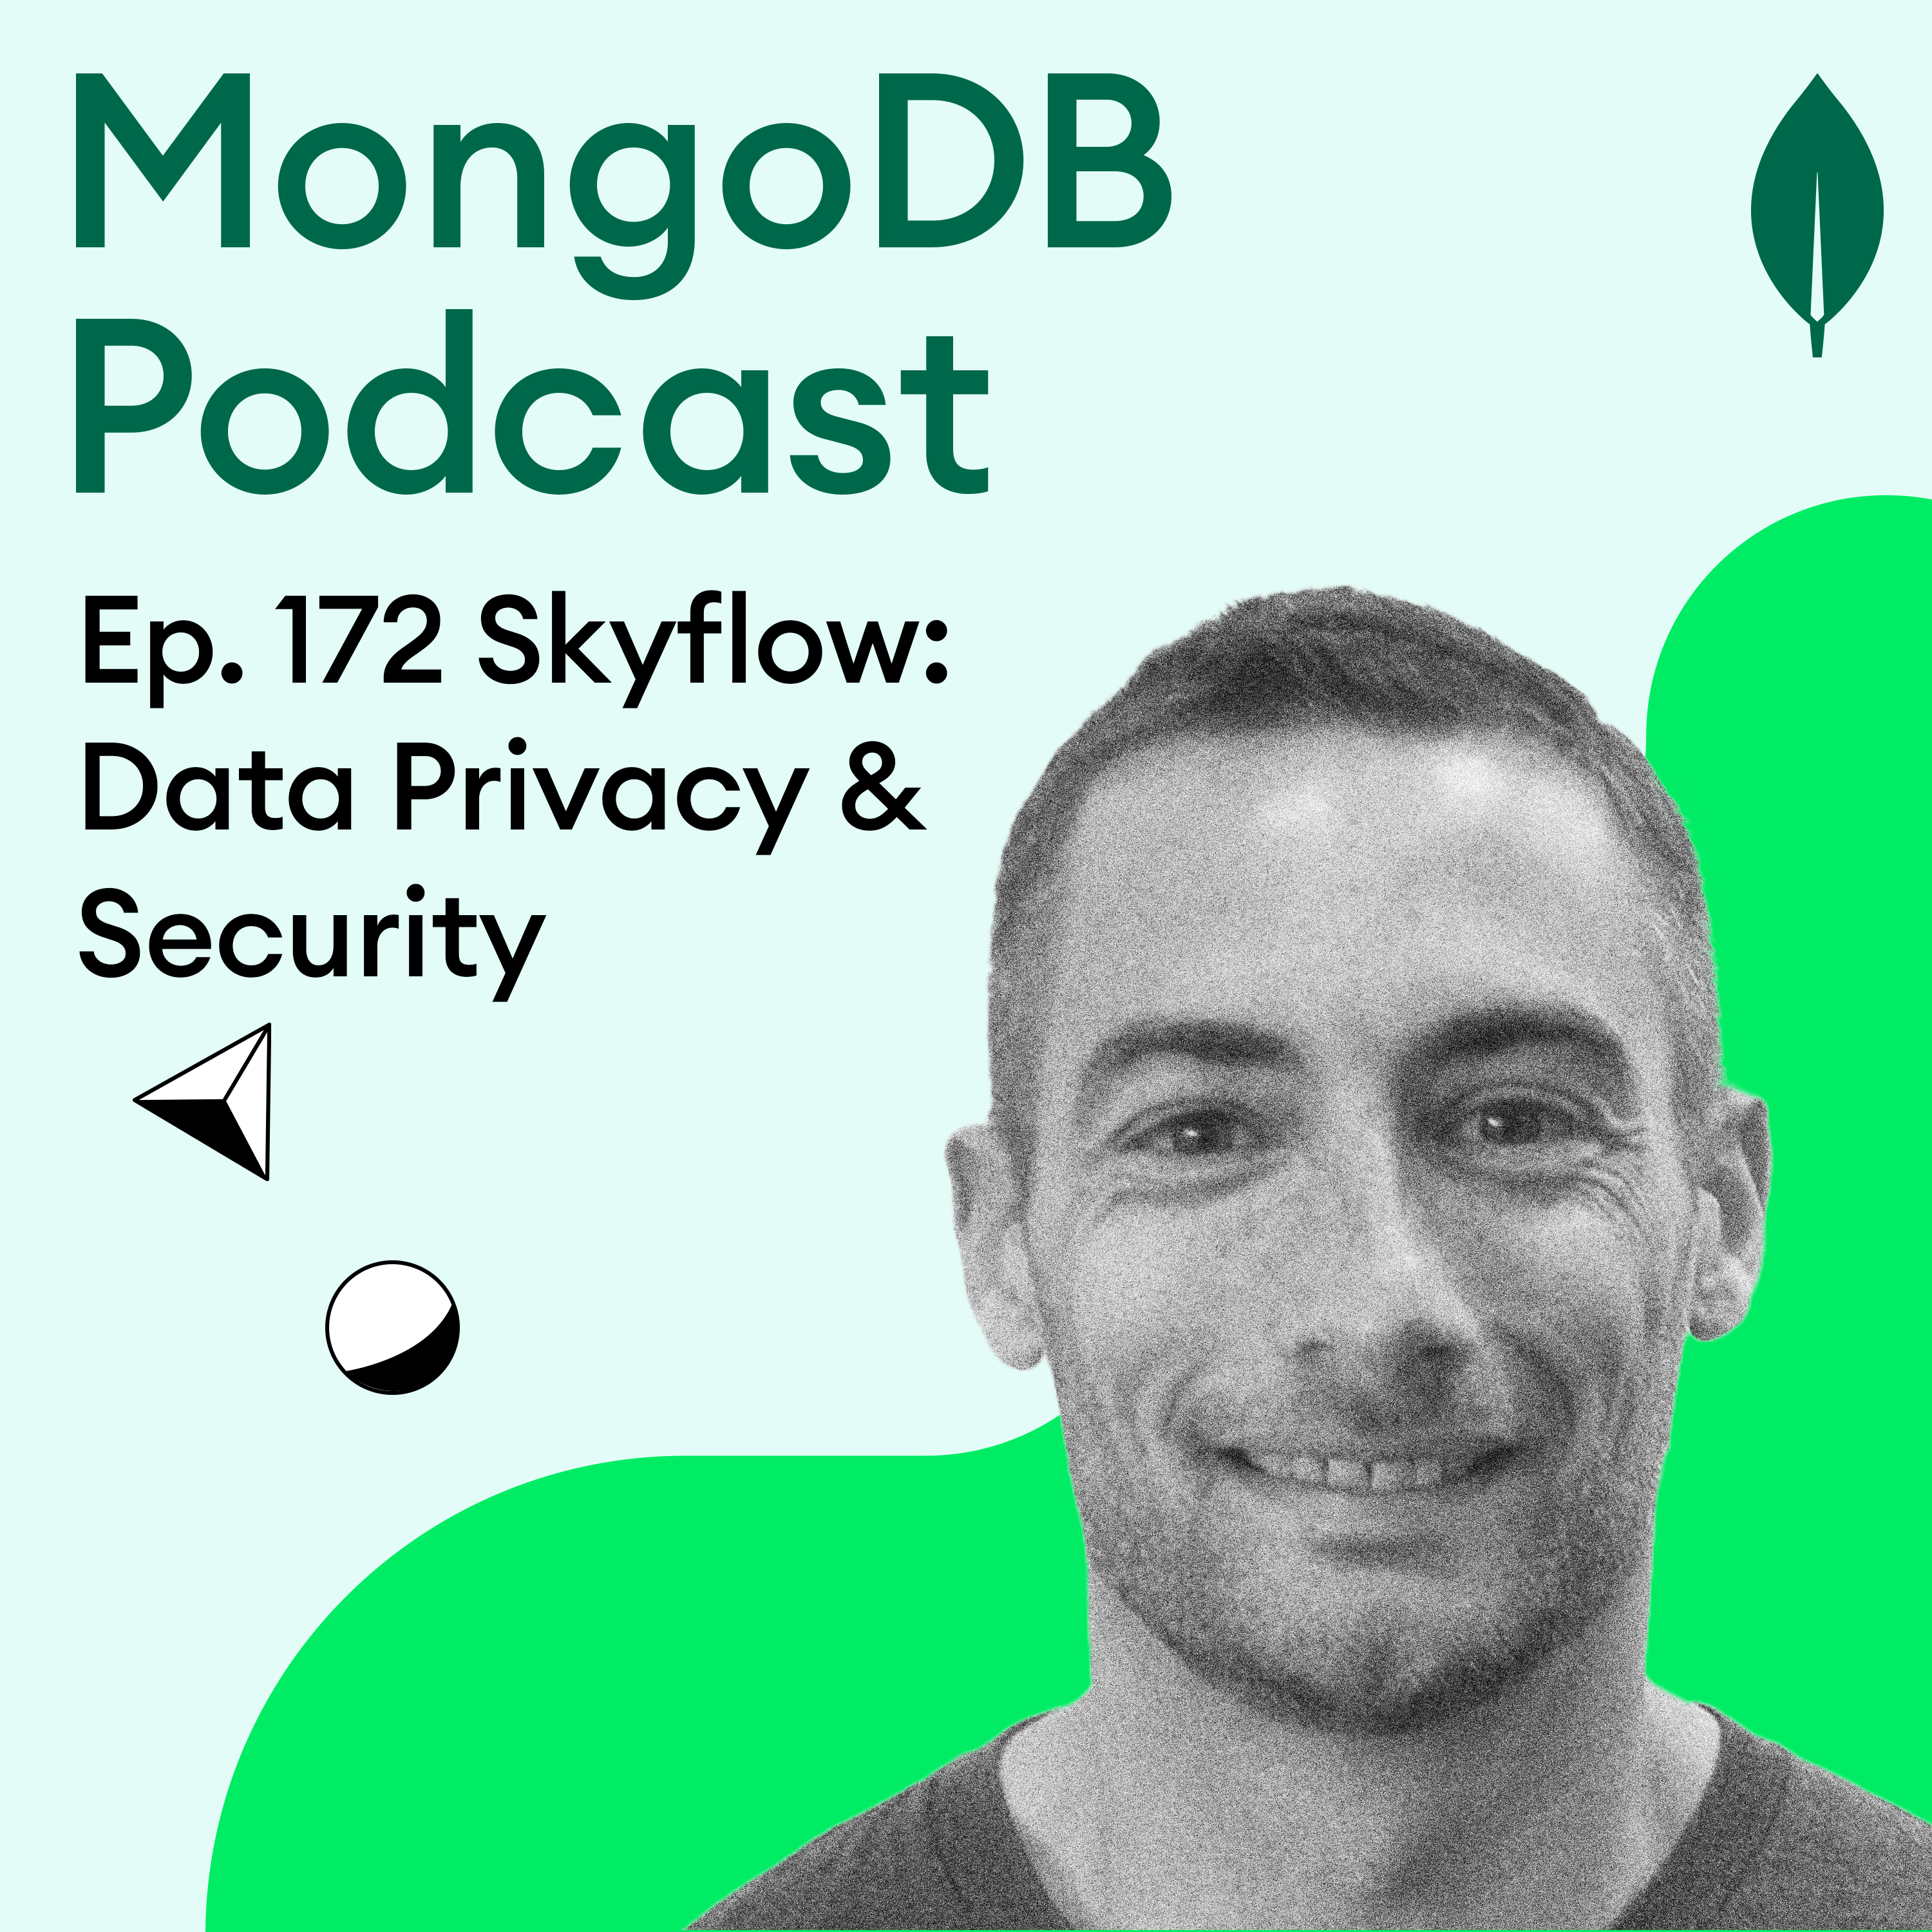 Ep. 172 Skyflow: Data Privacy & Security